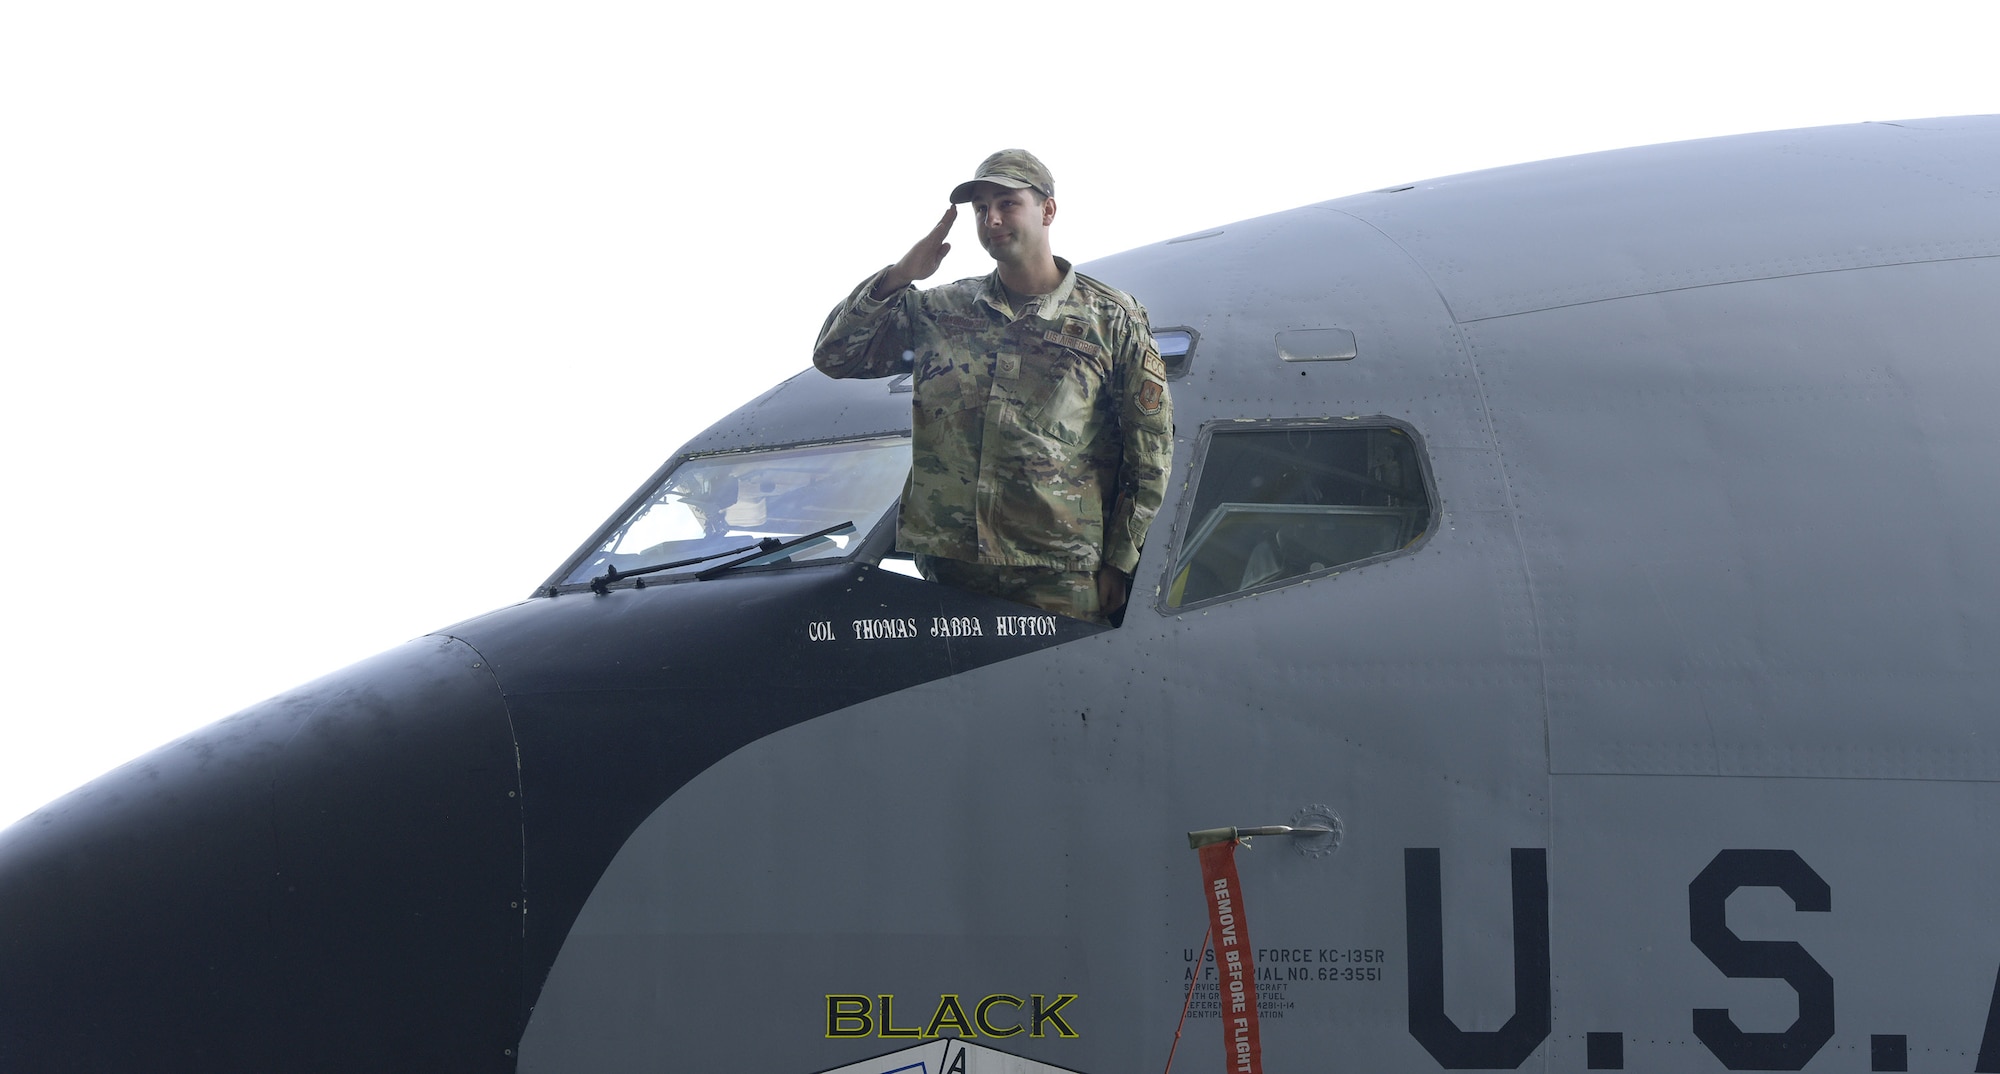 A U.S. Air Force Airman from the 100th Maintenance Group salutes new 100th Operations Group commander, Col. Thomas Hutton, after revealing the new commander’s name on a KC-135 Stratotanker during a change of command ceremony at Royal Air Force Mildenhall, England, June 16, 2022. Hutton joins the 100th Air Refueling Wing from Ramstein Air Base, Germany, and is a command pilot with more than 3,000 flying hours in tanker and trainer aircraft. (U.S. Air Force photo by Karen Abeyasekere)